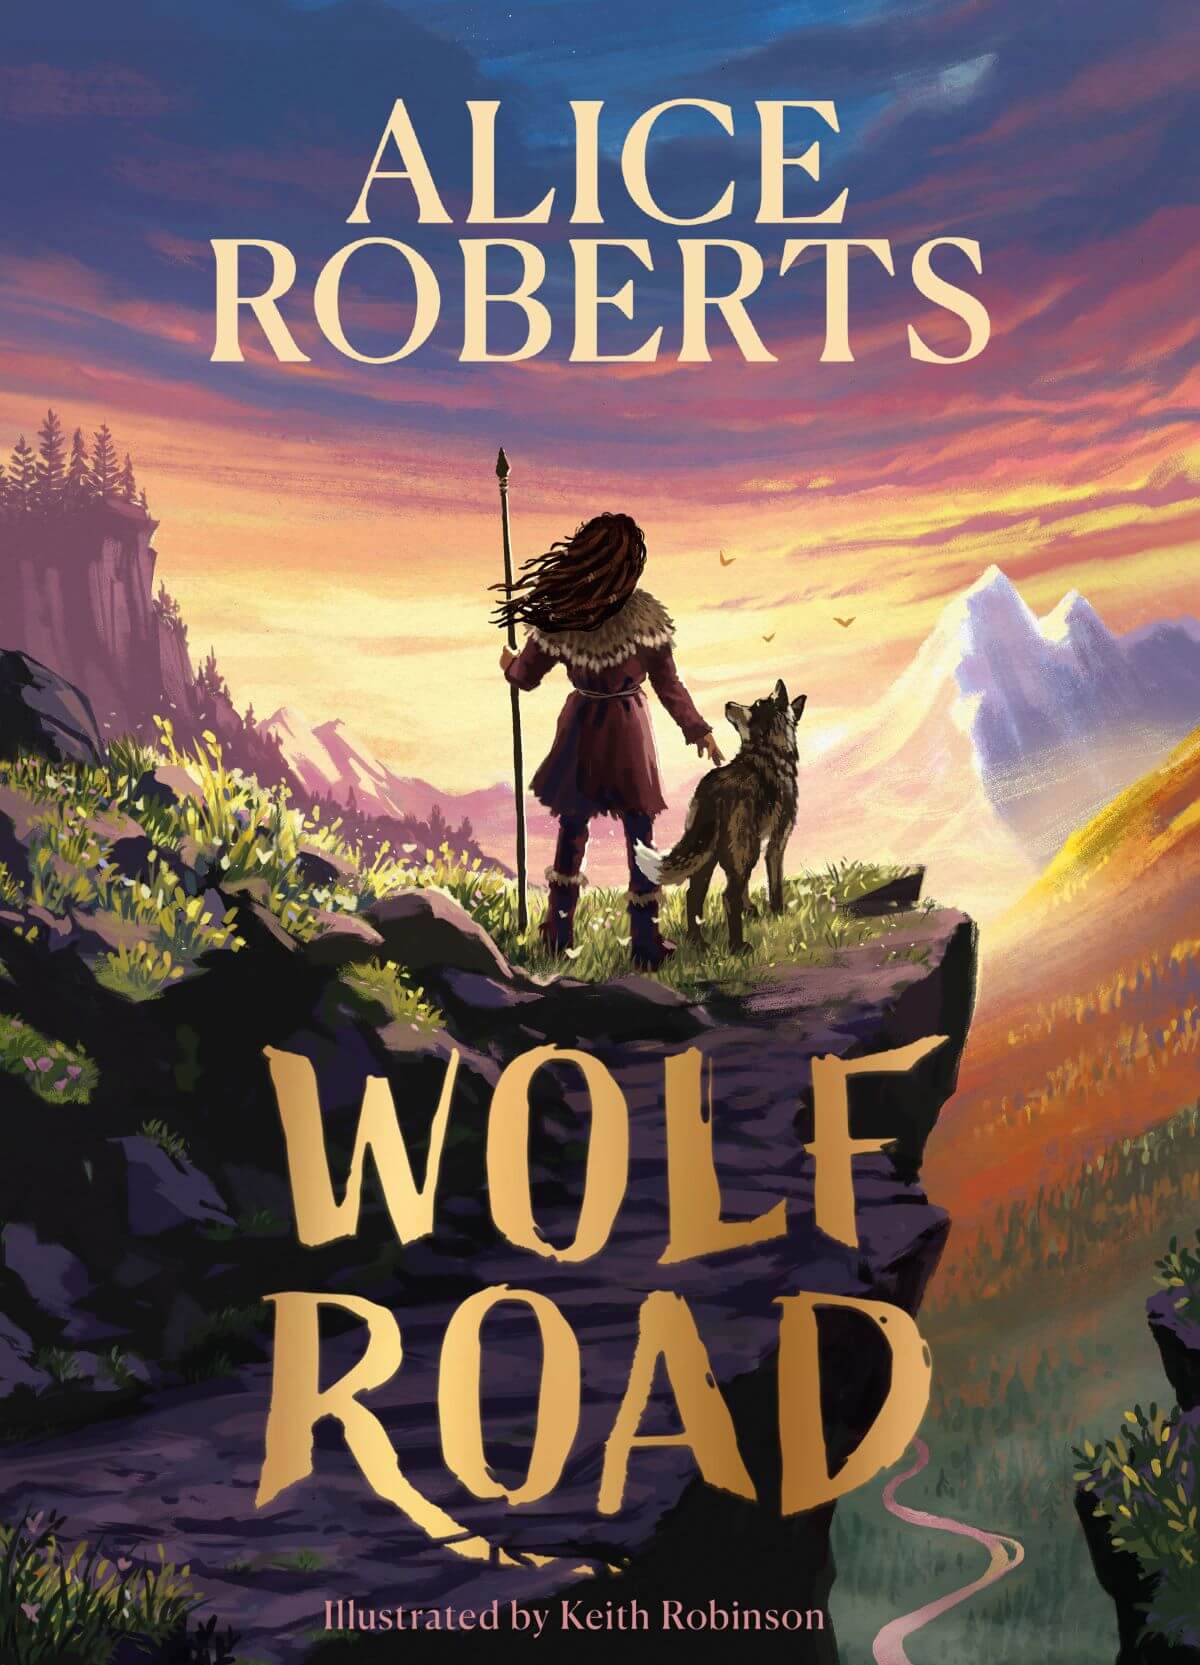 an illustrated children's book cover showing a person and a wolf standing on a mountain overlooking the sunset